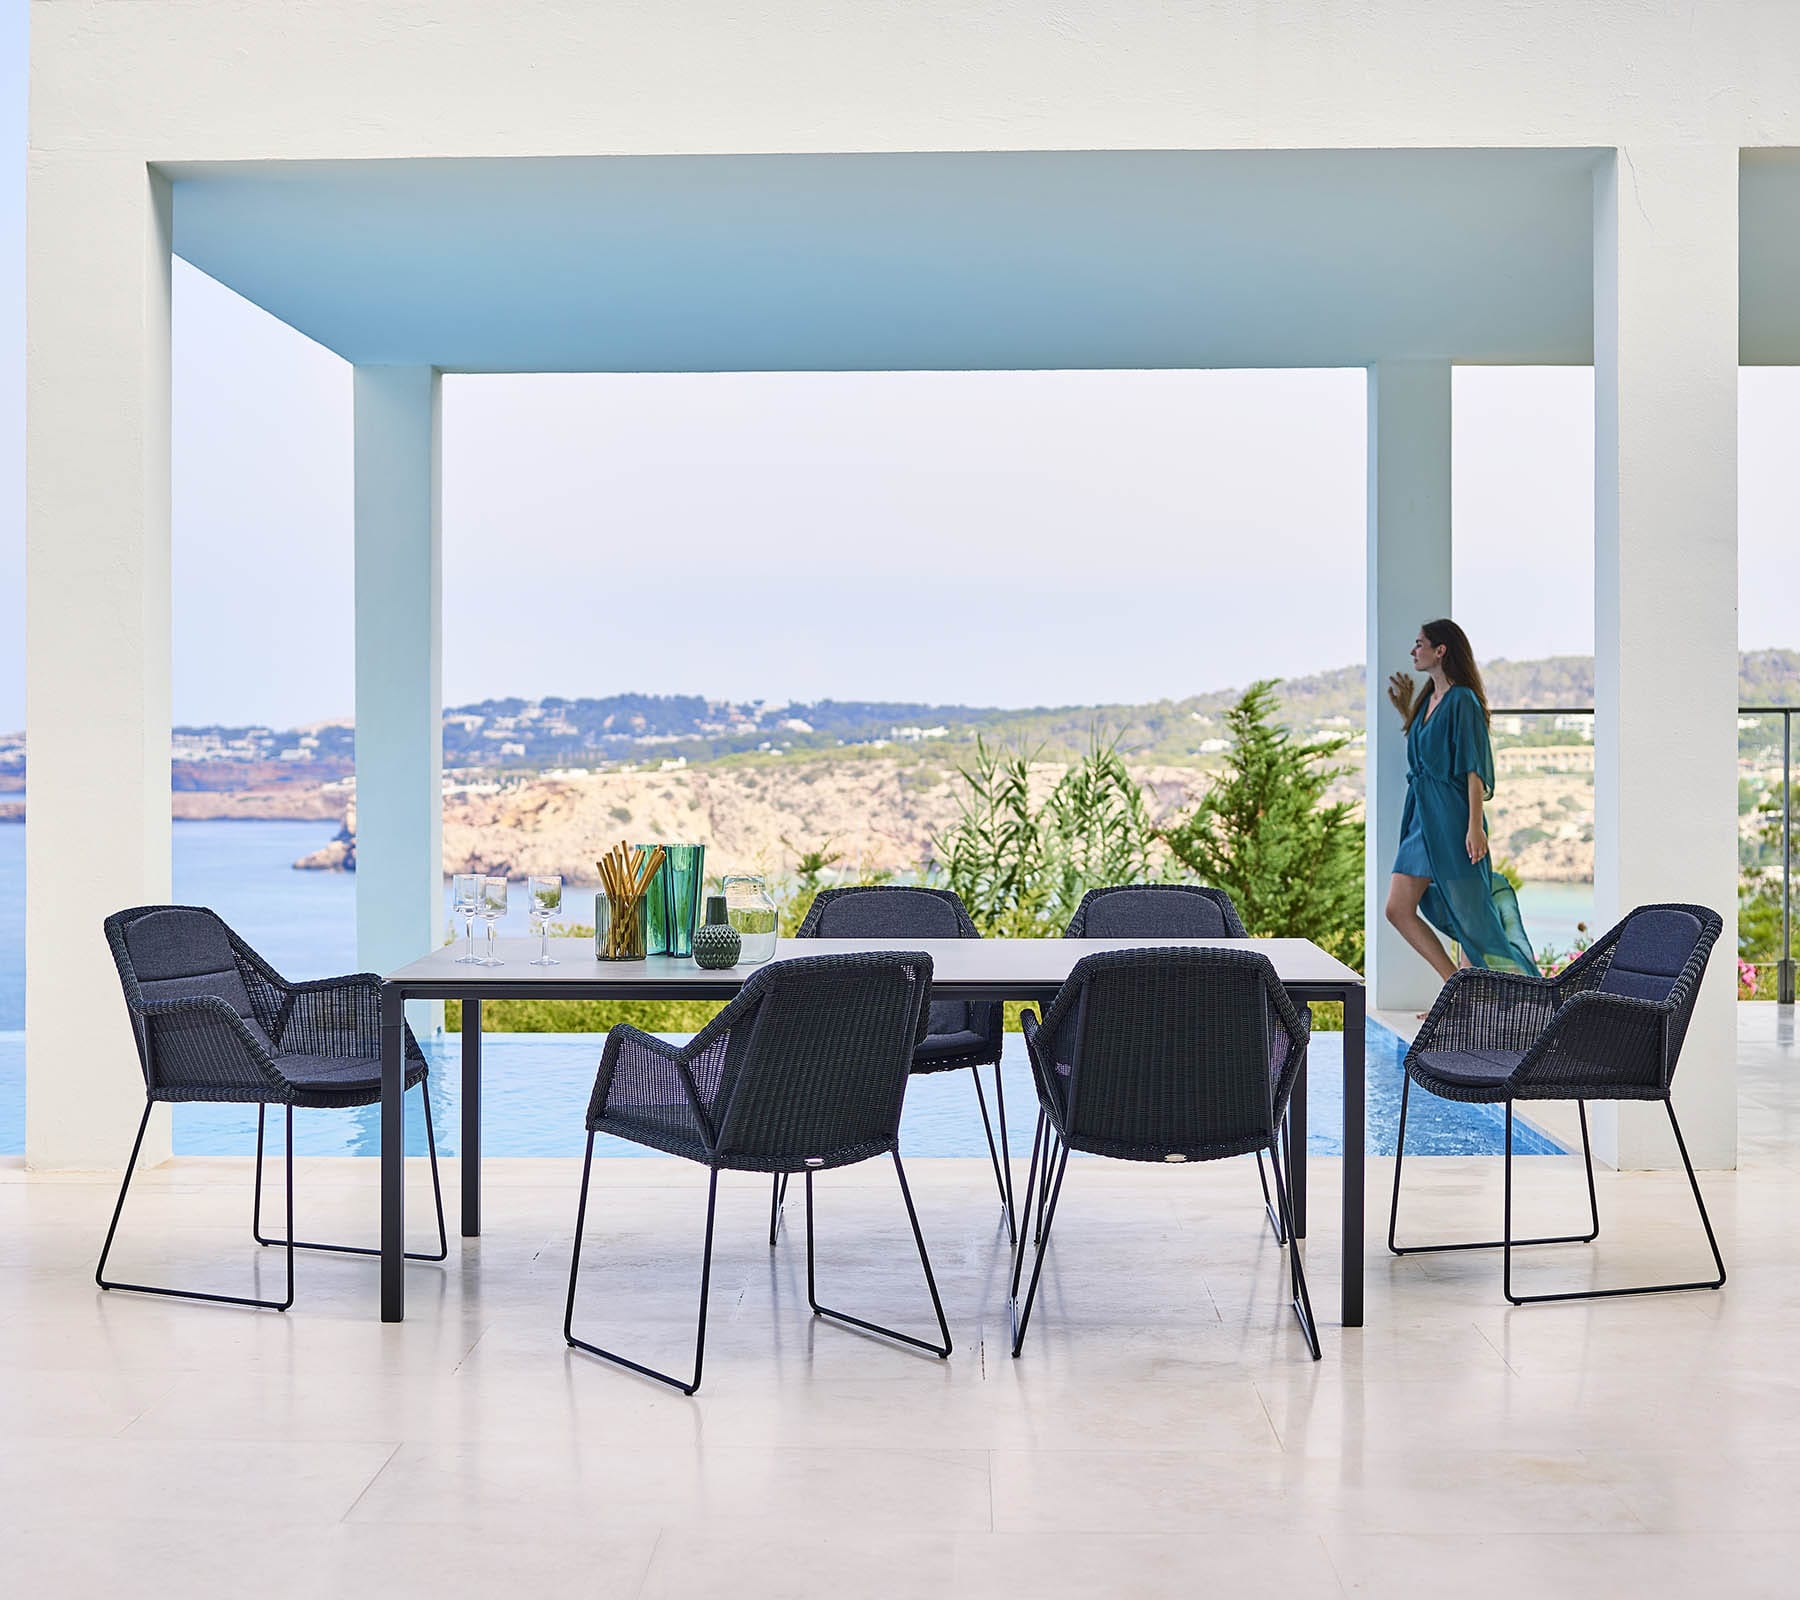 Boxhill's Breeze Dining Weave Chair Black lifestyle image with dining table beside the pool with woman standing